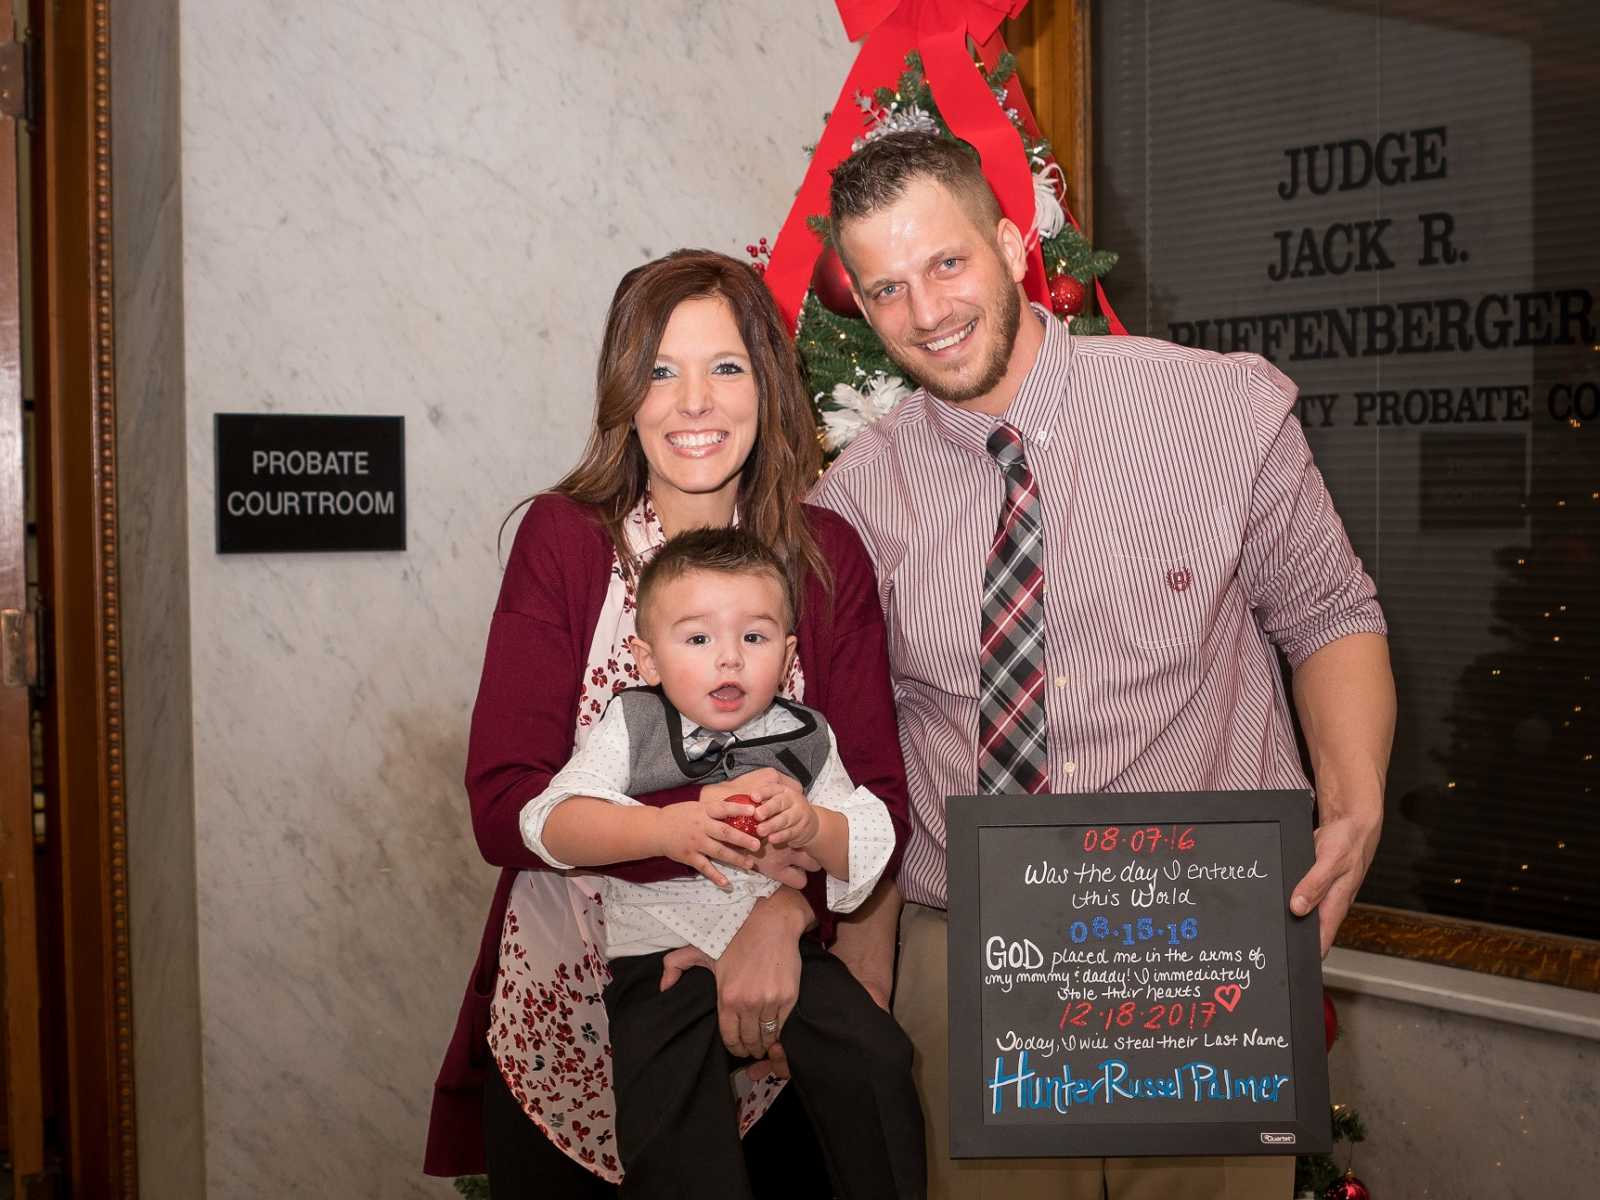 adoptive parents pose for picture with adoptive son and sign with the date of the adoption and childs name